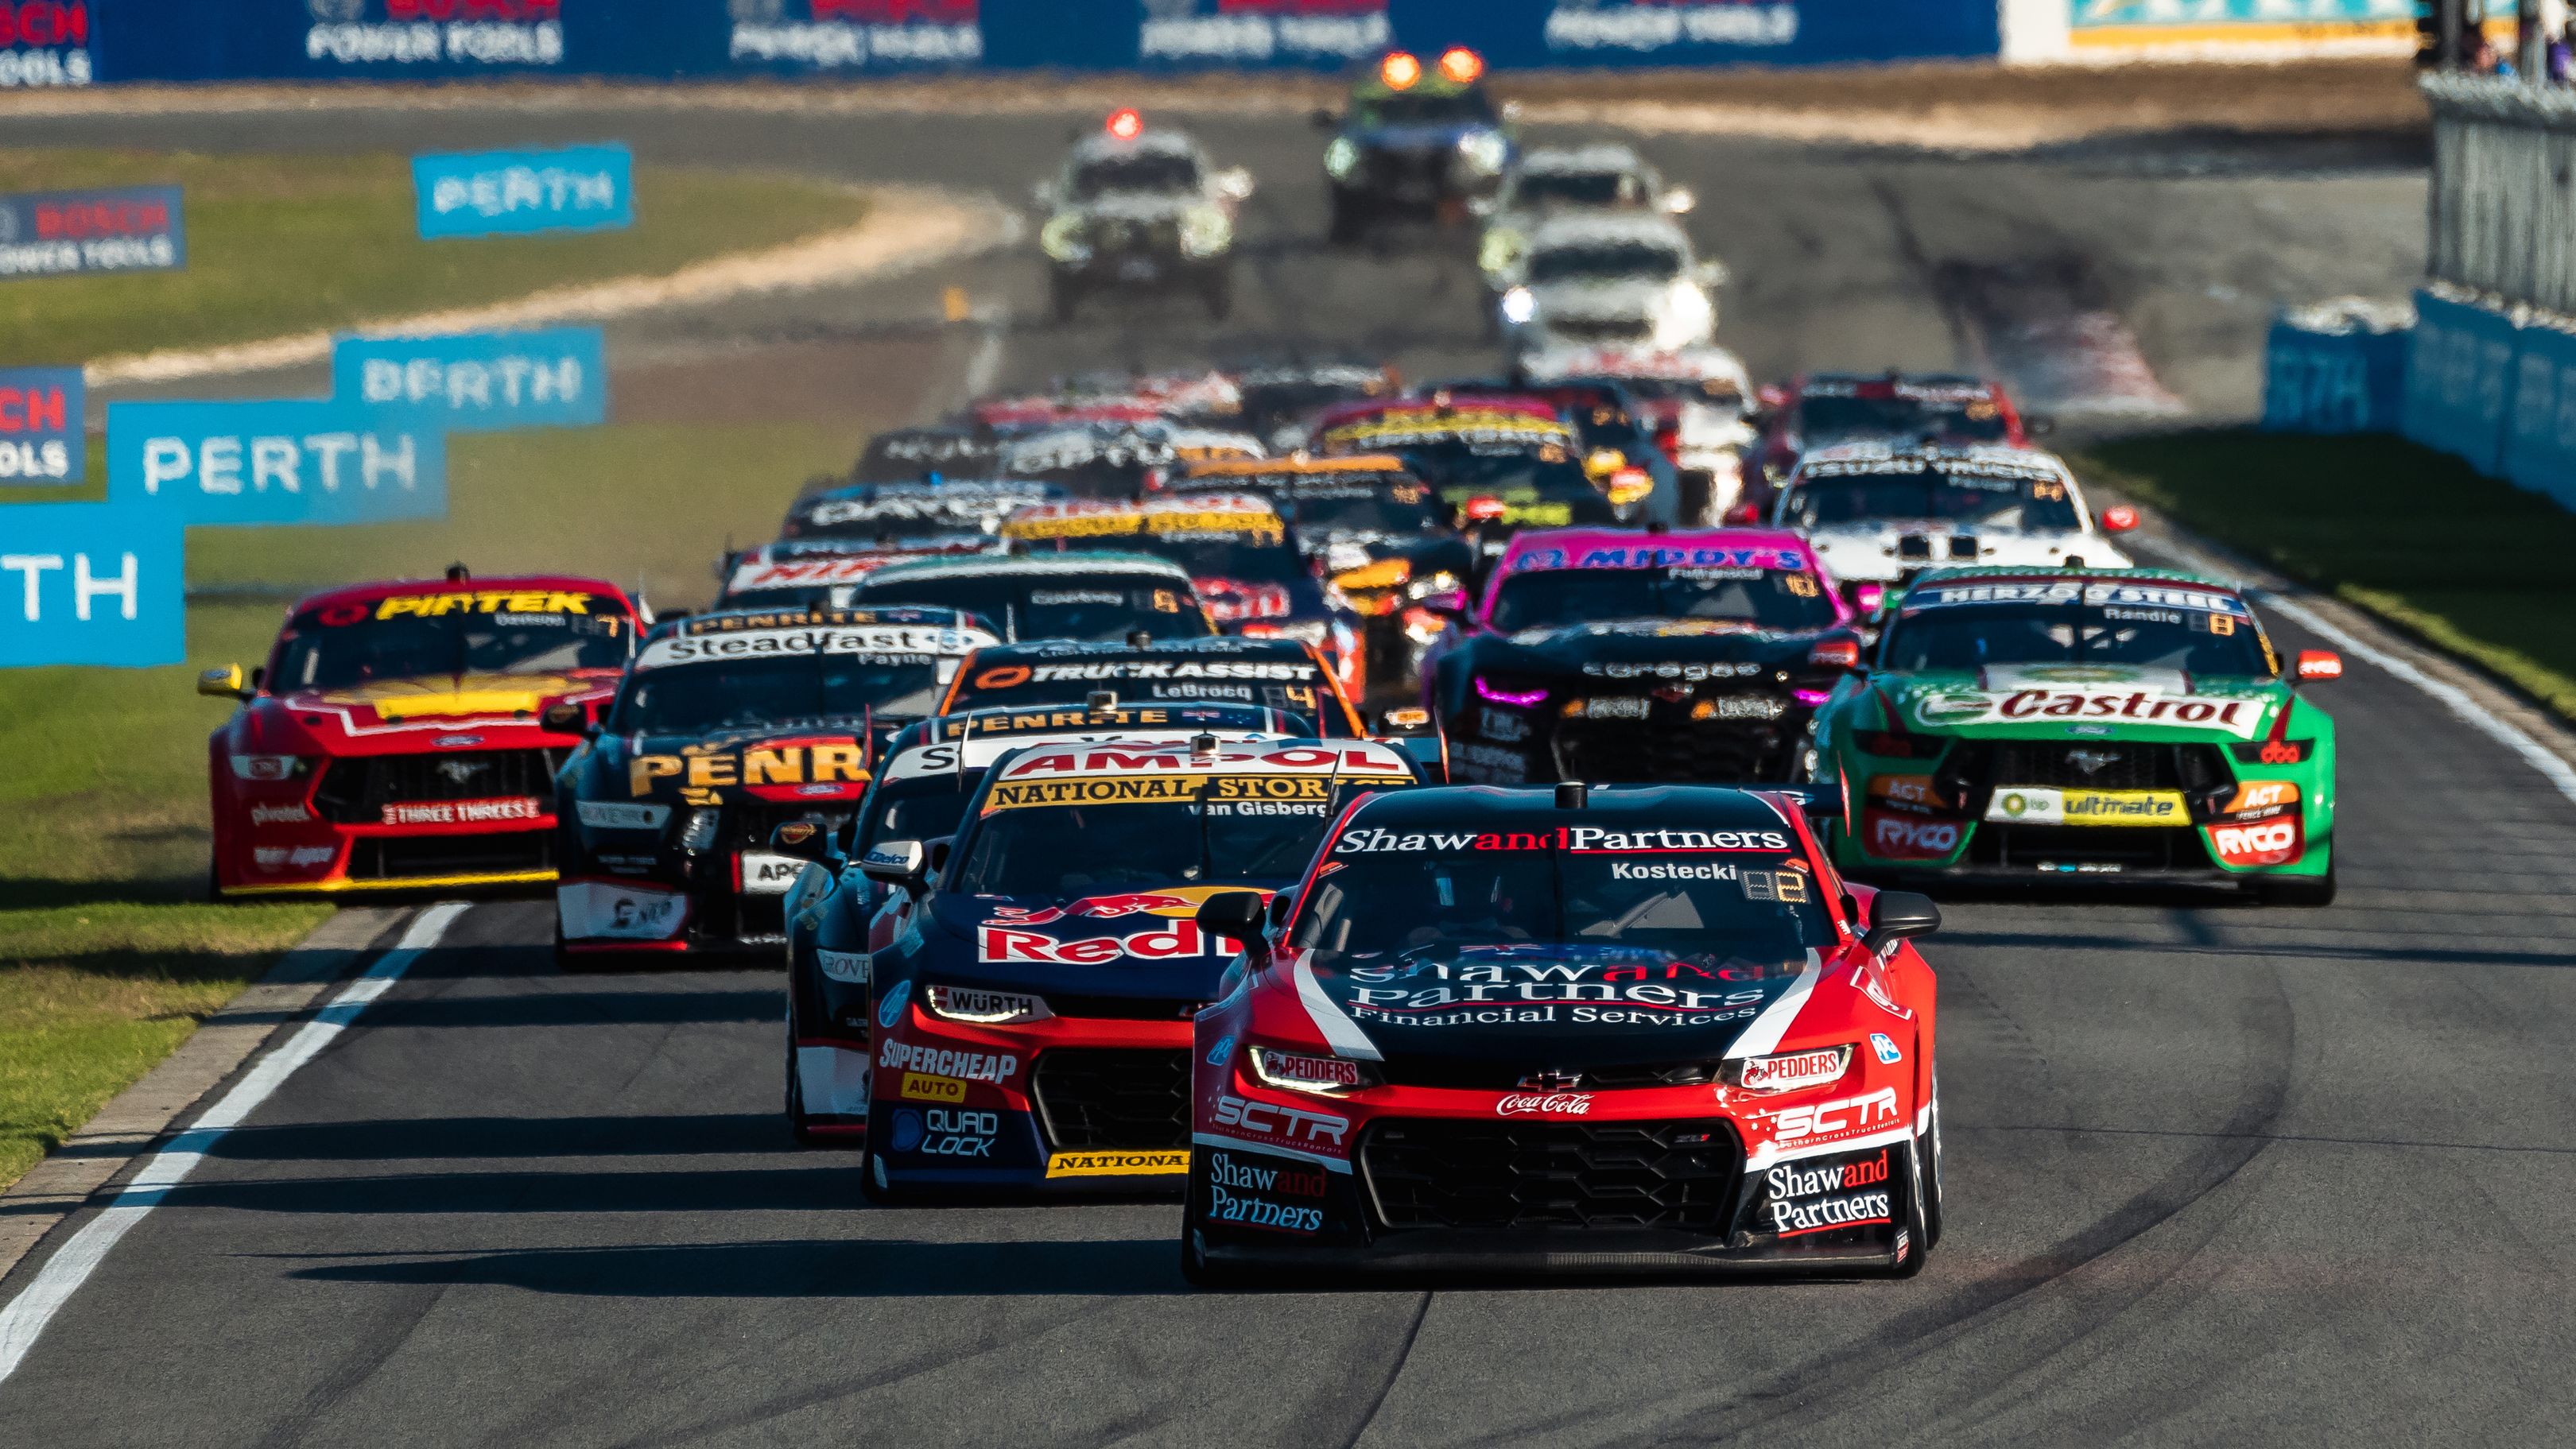 Brodie Kostecki leads the Supercars field into turn one at Wanneroo Raceway.